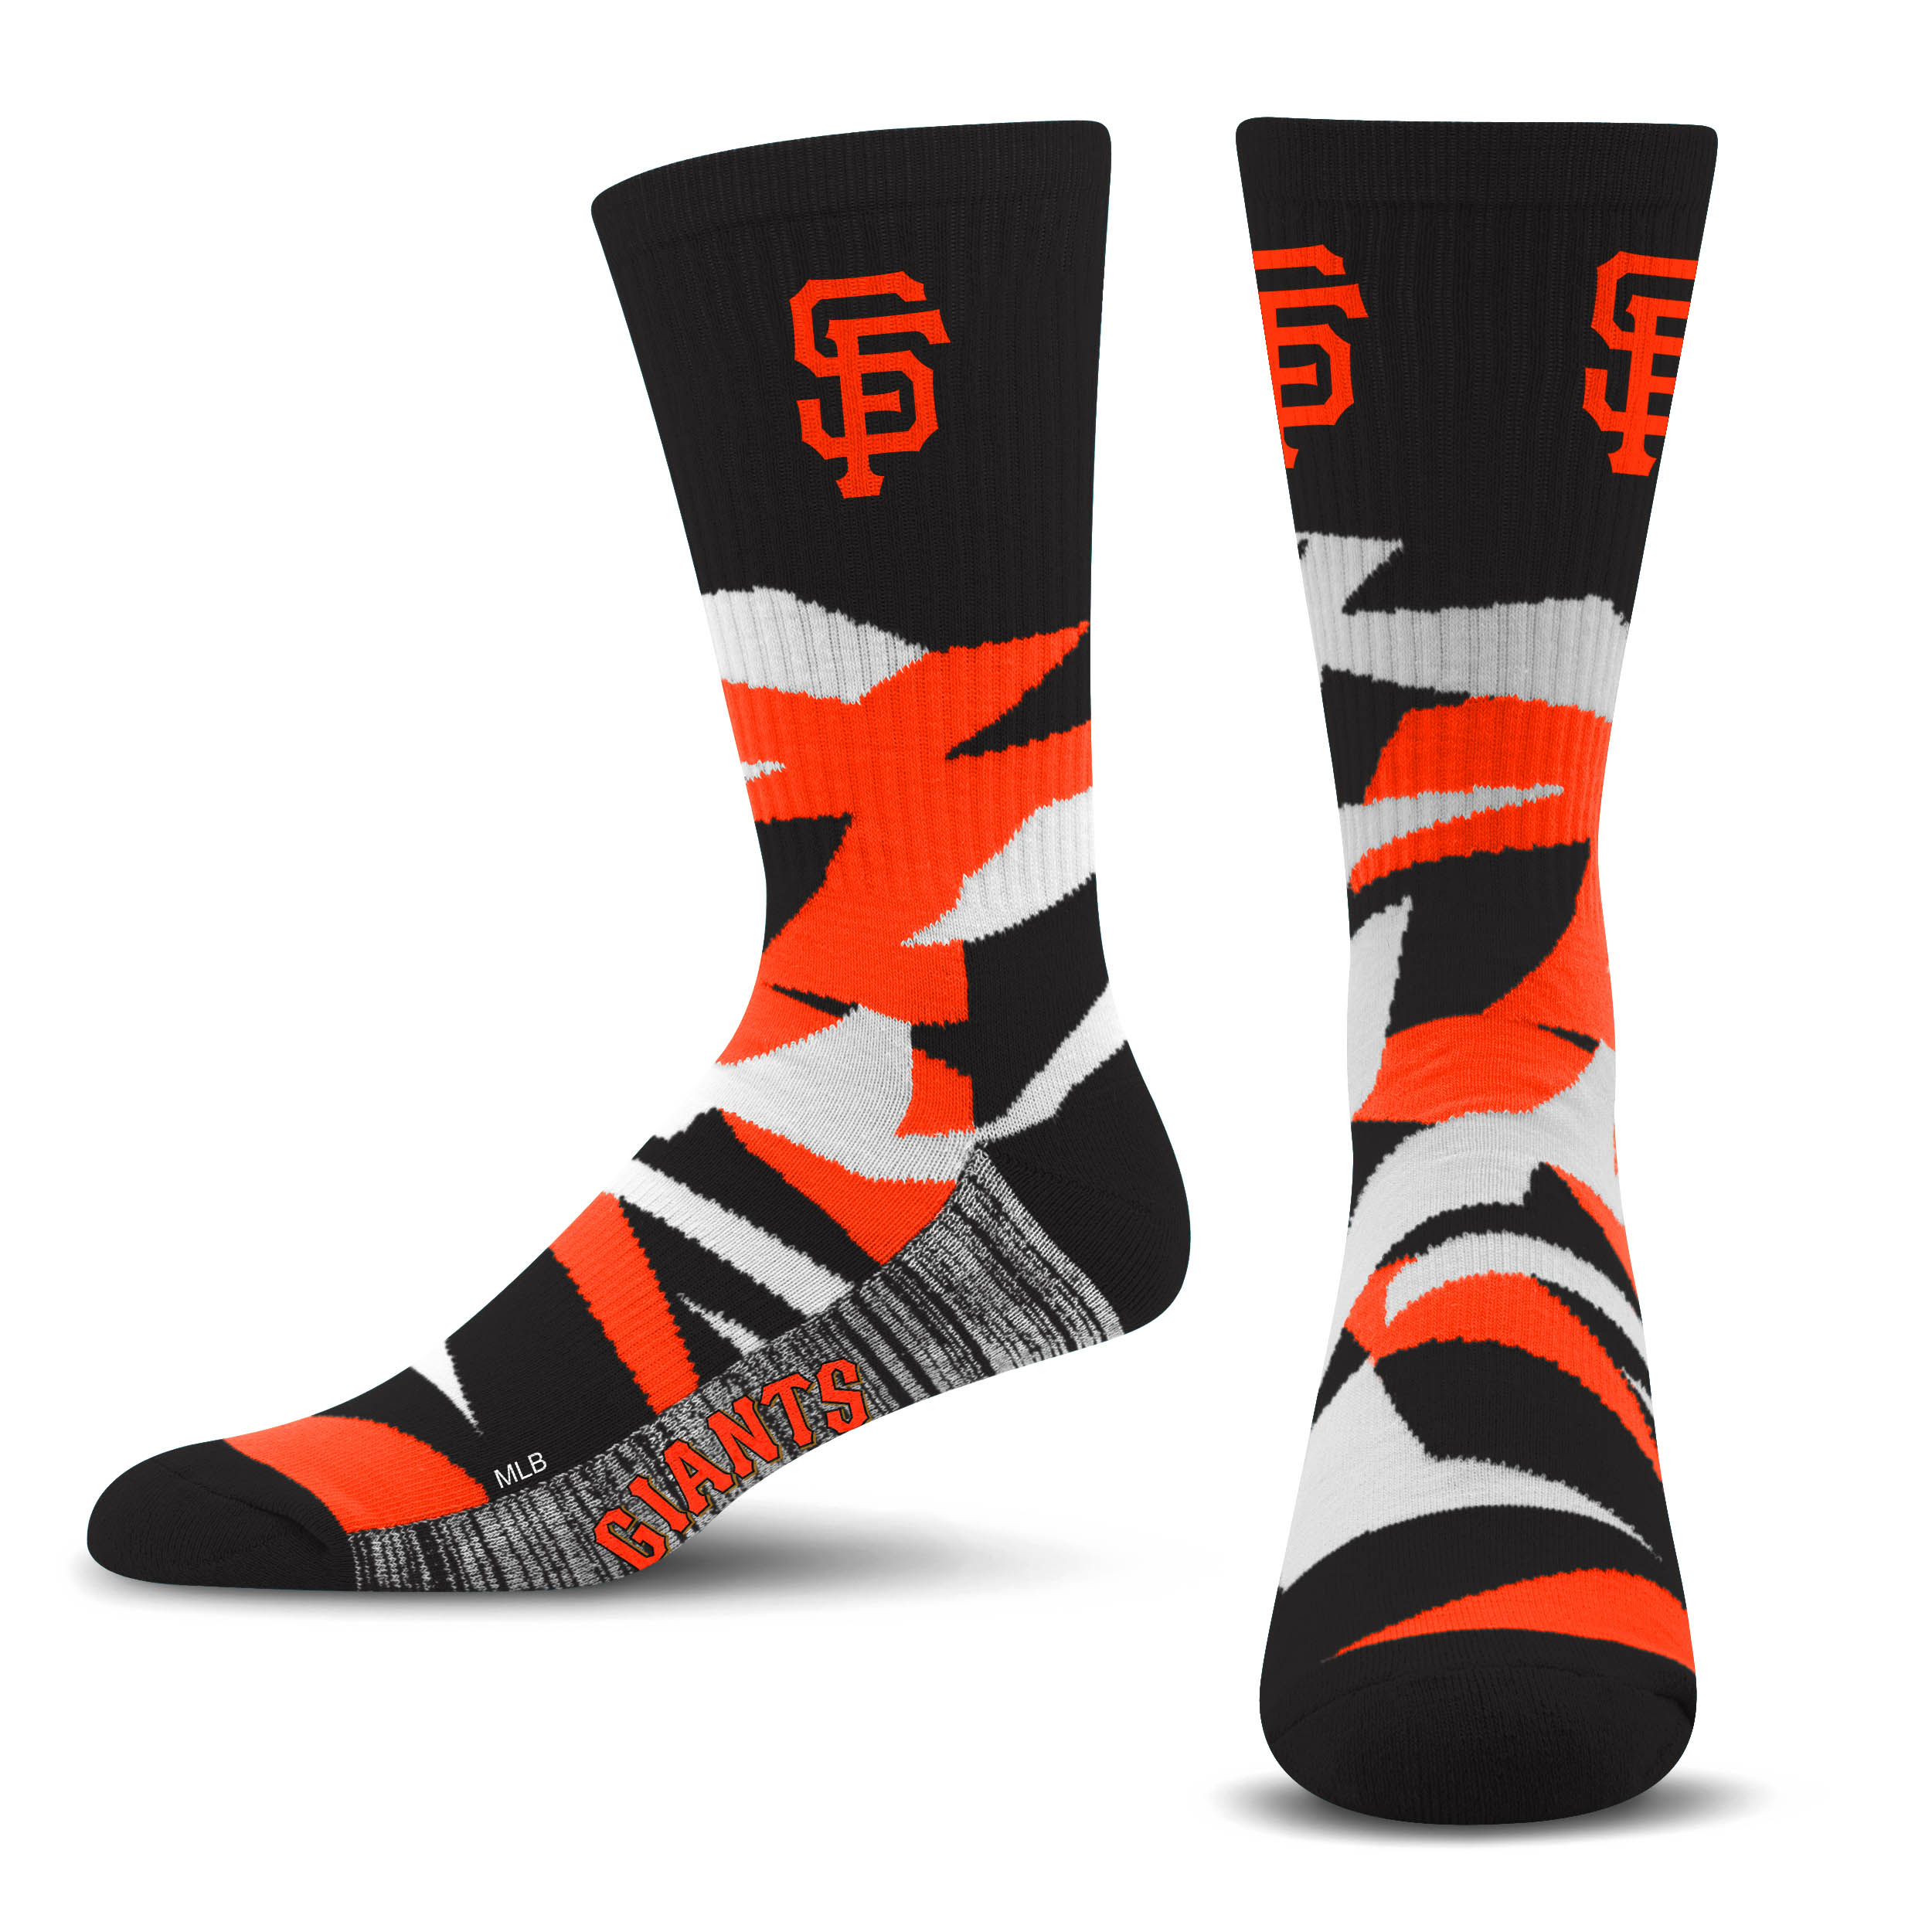 Officially Licensed MLB San Francisco Giants Breakout Premium Crew Socks, Youth Size | for Bare Feet